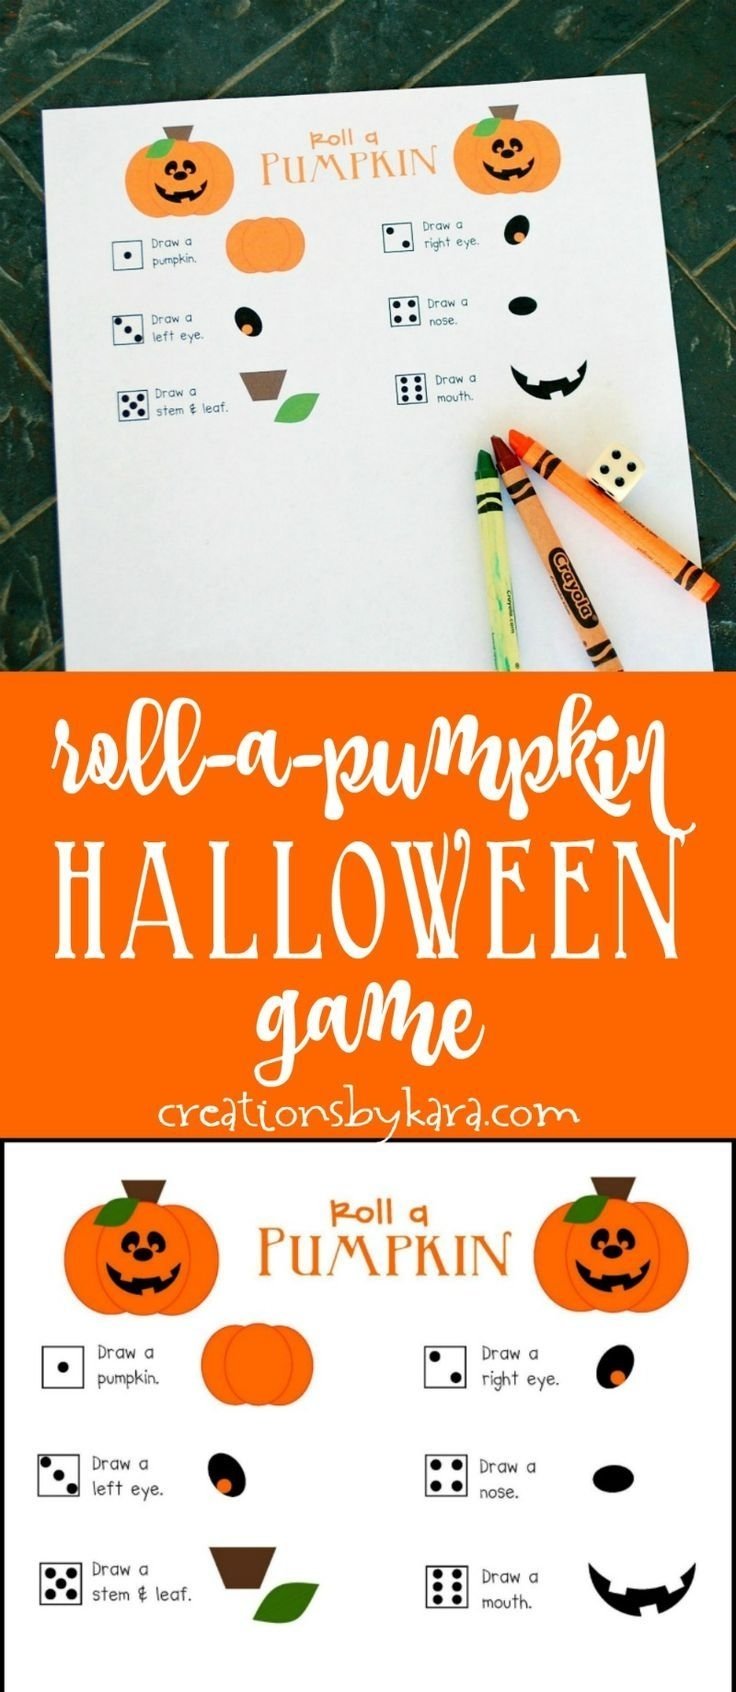 10 Elegant Halloween Game Ideas For Adults 514 best halloween ideas for parties images on pinterest halloween 2023